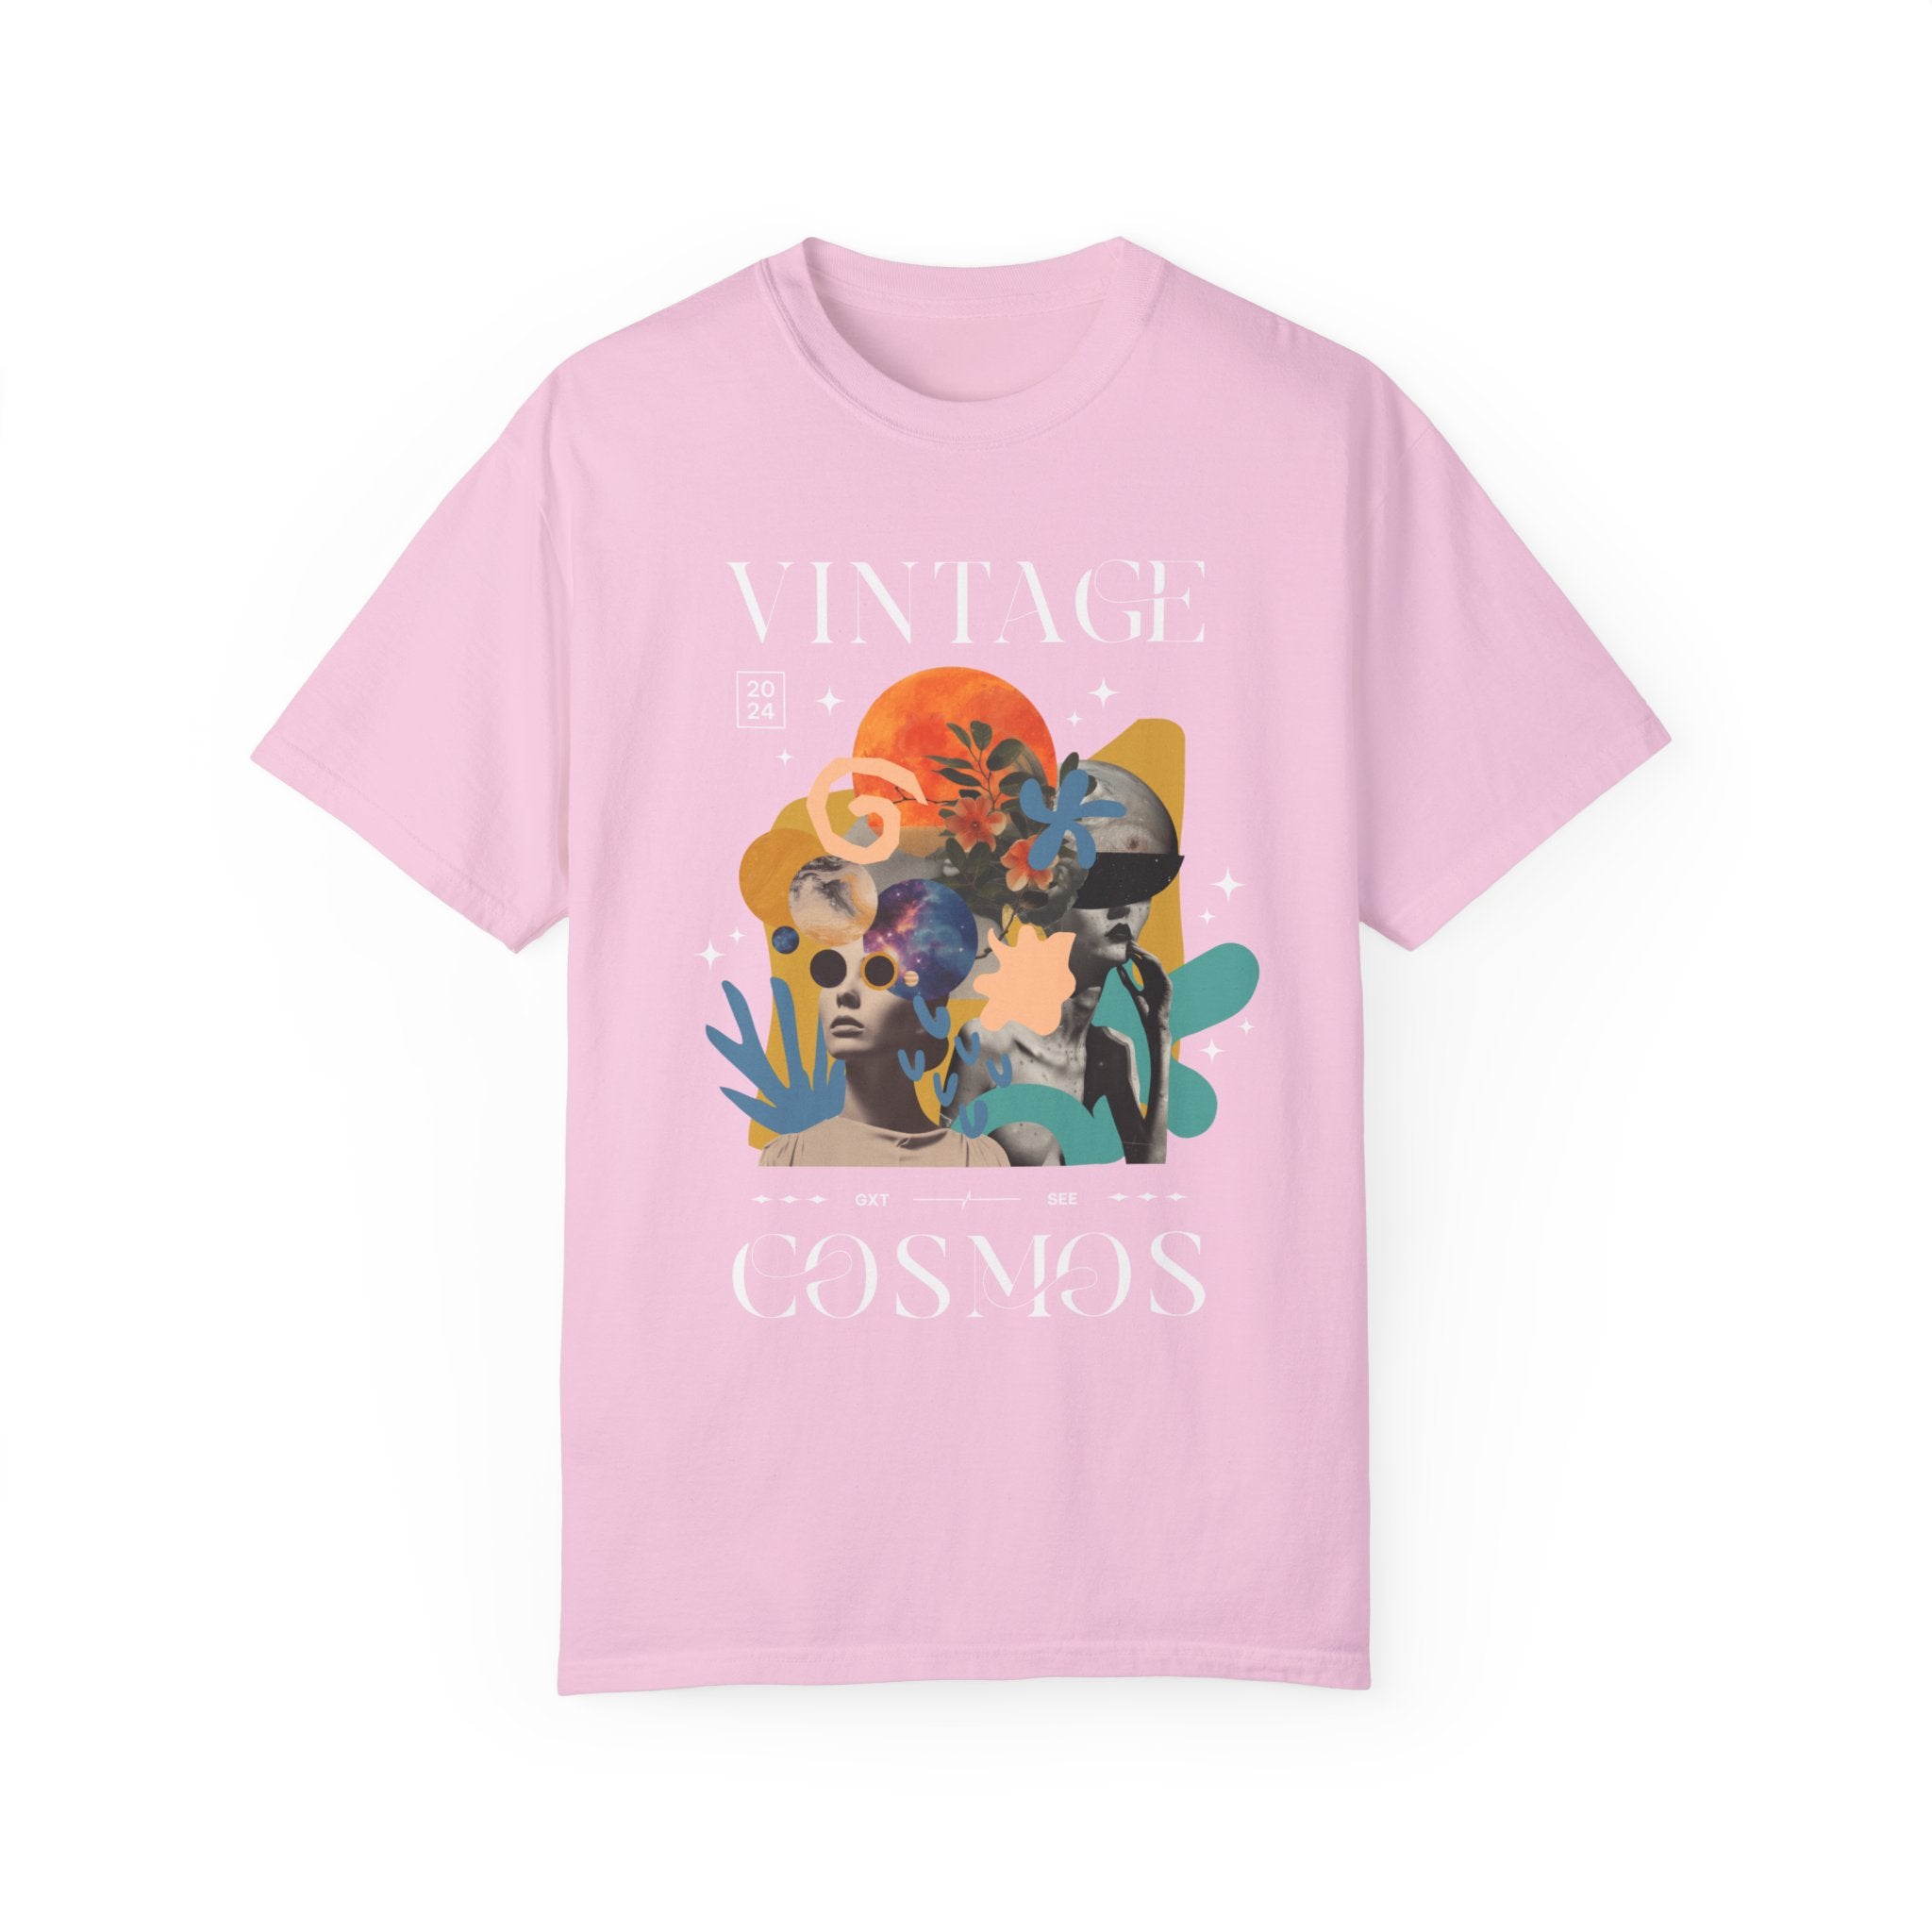 GOLDxTEAL Vintage Cosmos graphic t-shirt.